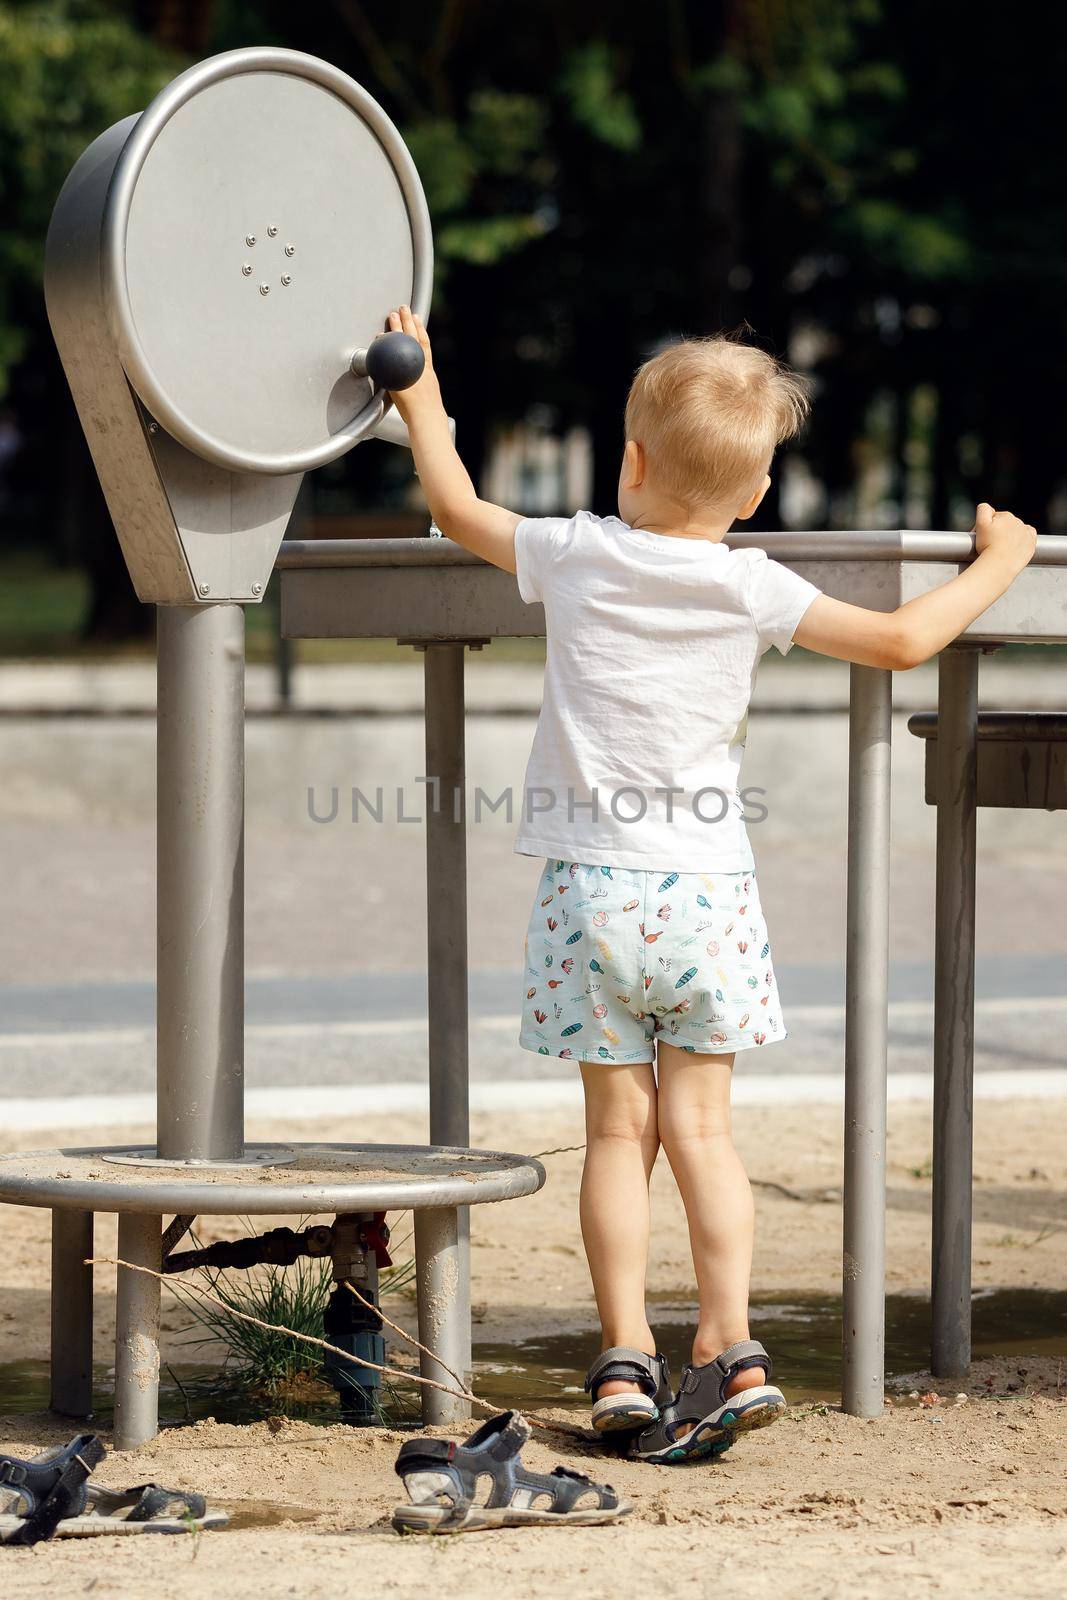 A little boy wearing shorts and a t-shirt plays with a tap in a public park. by Lincikas